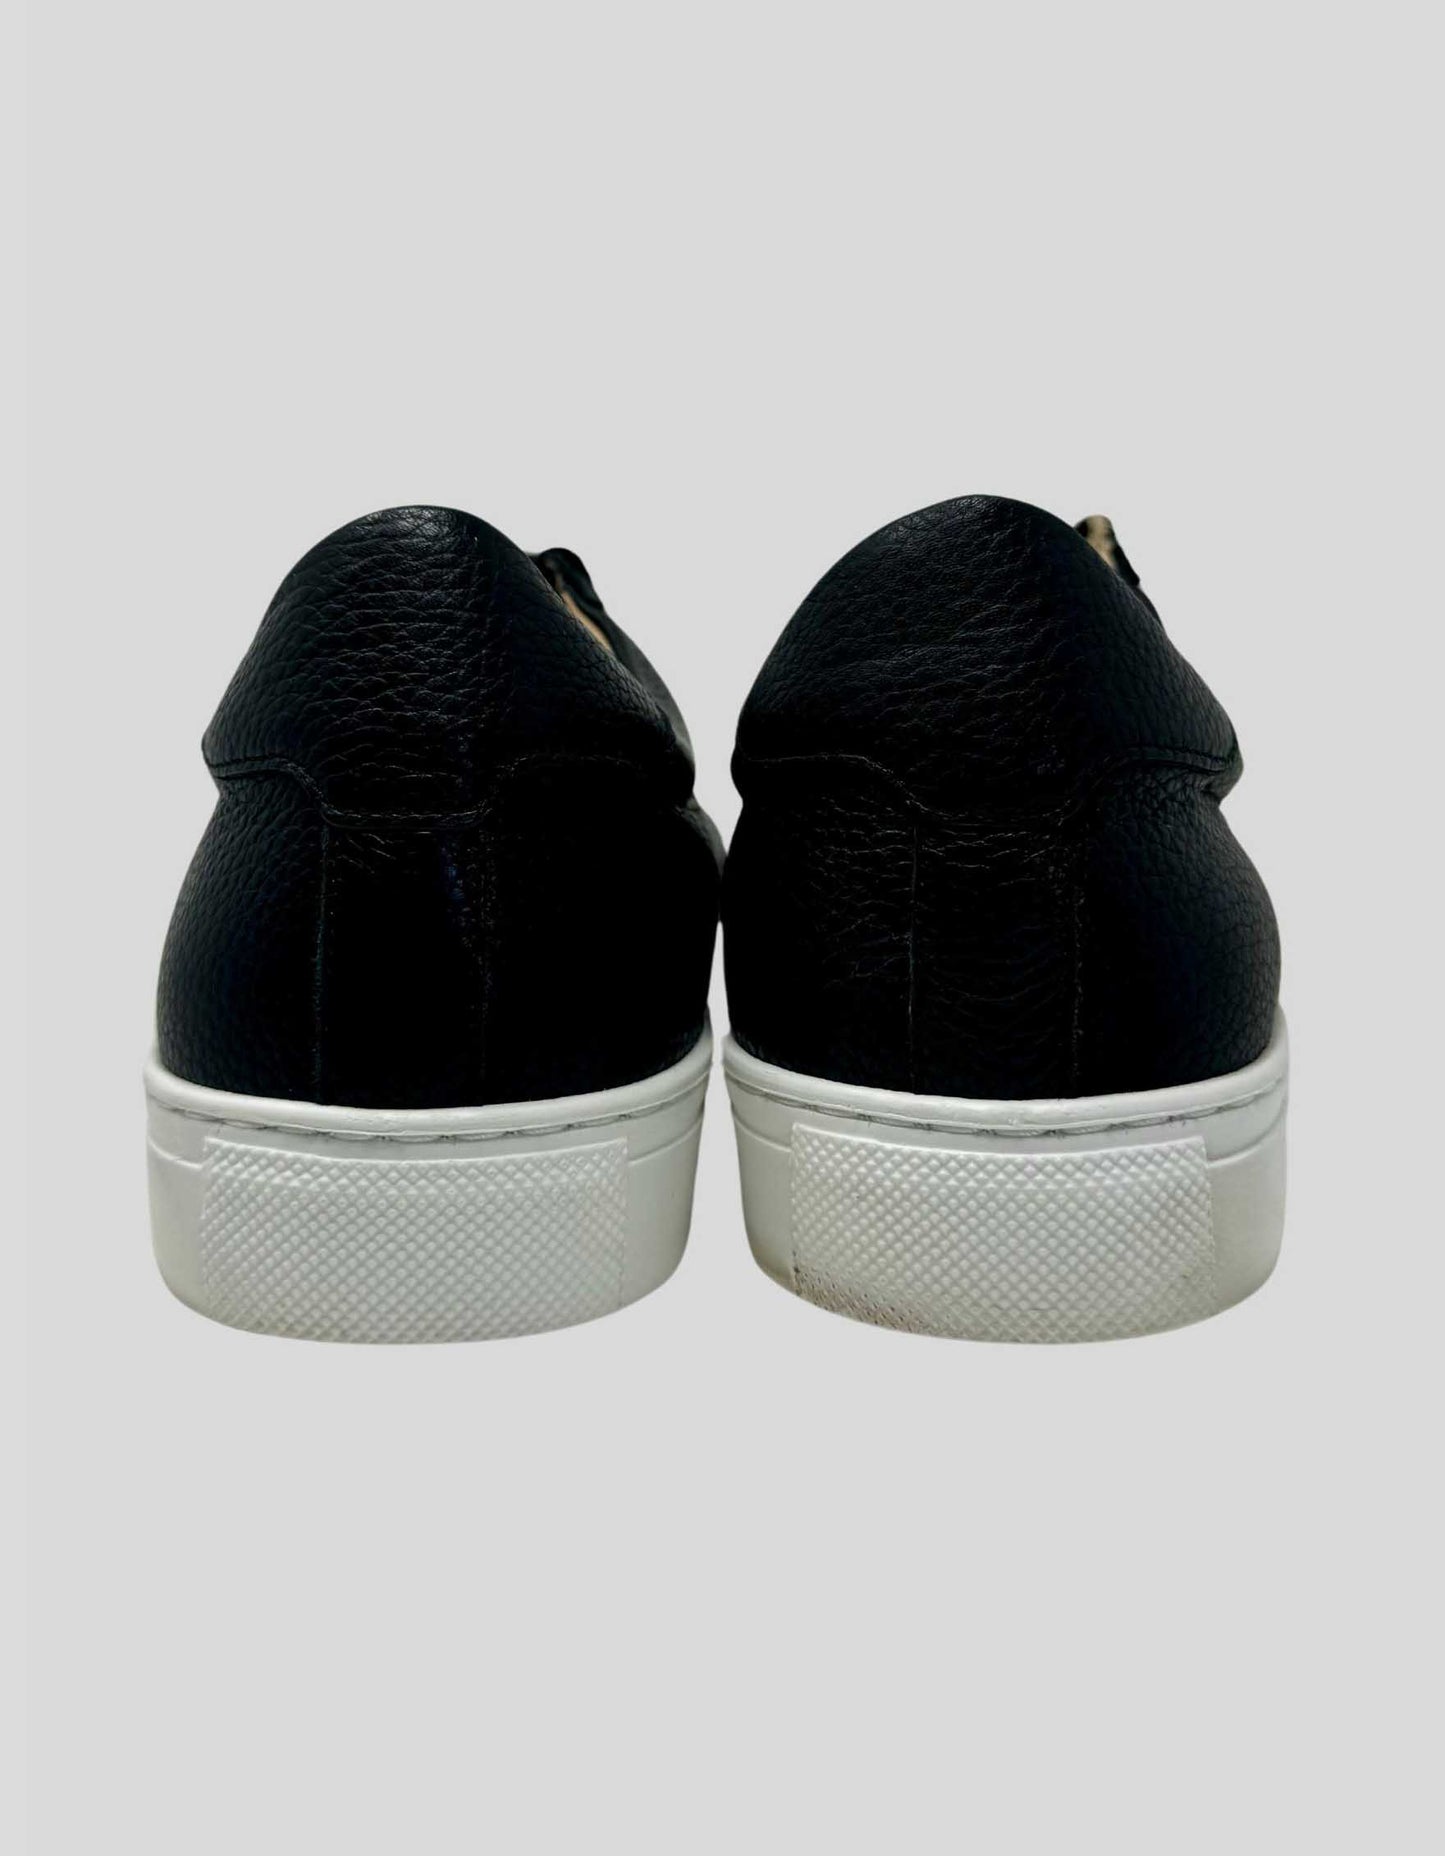 SUIT SUPPLY Black Leather Sneaker - 11 US | 44 IT